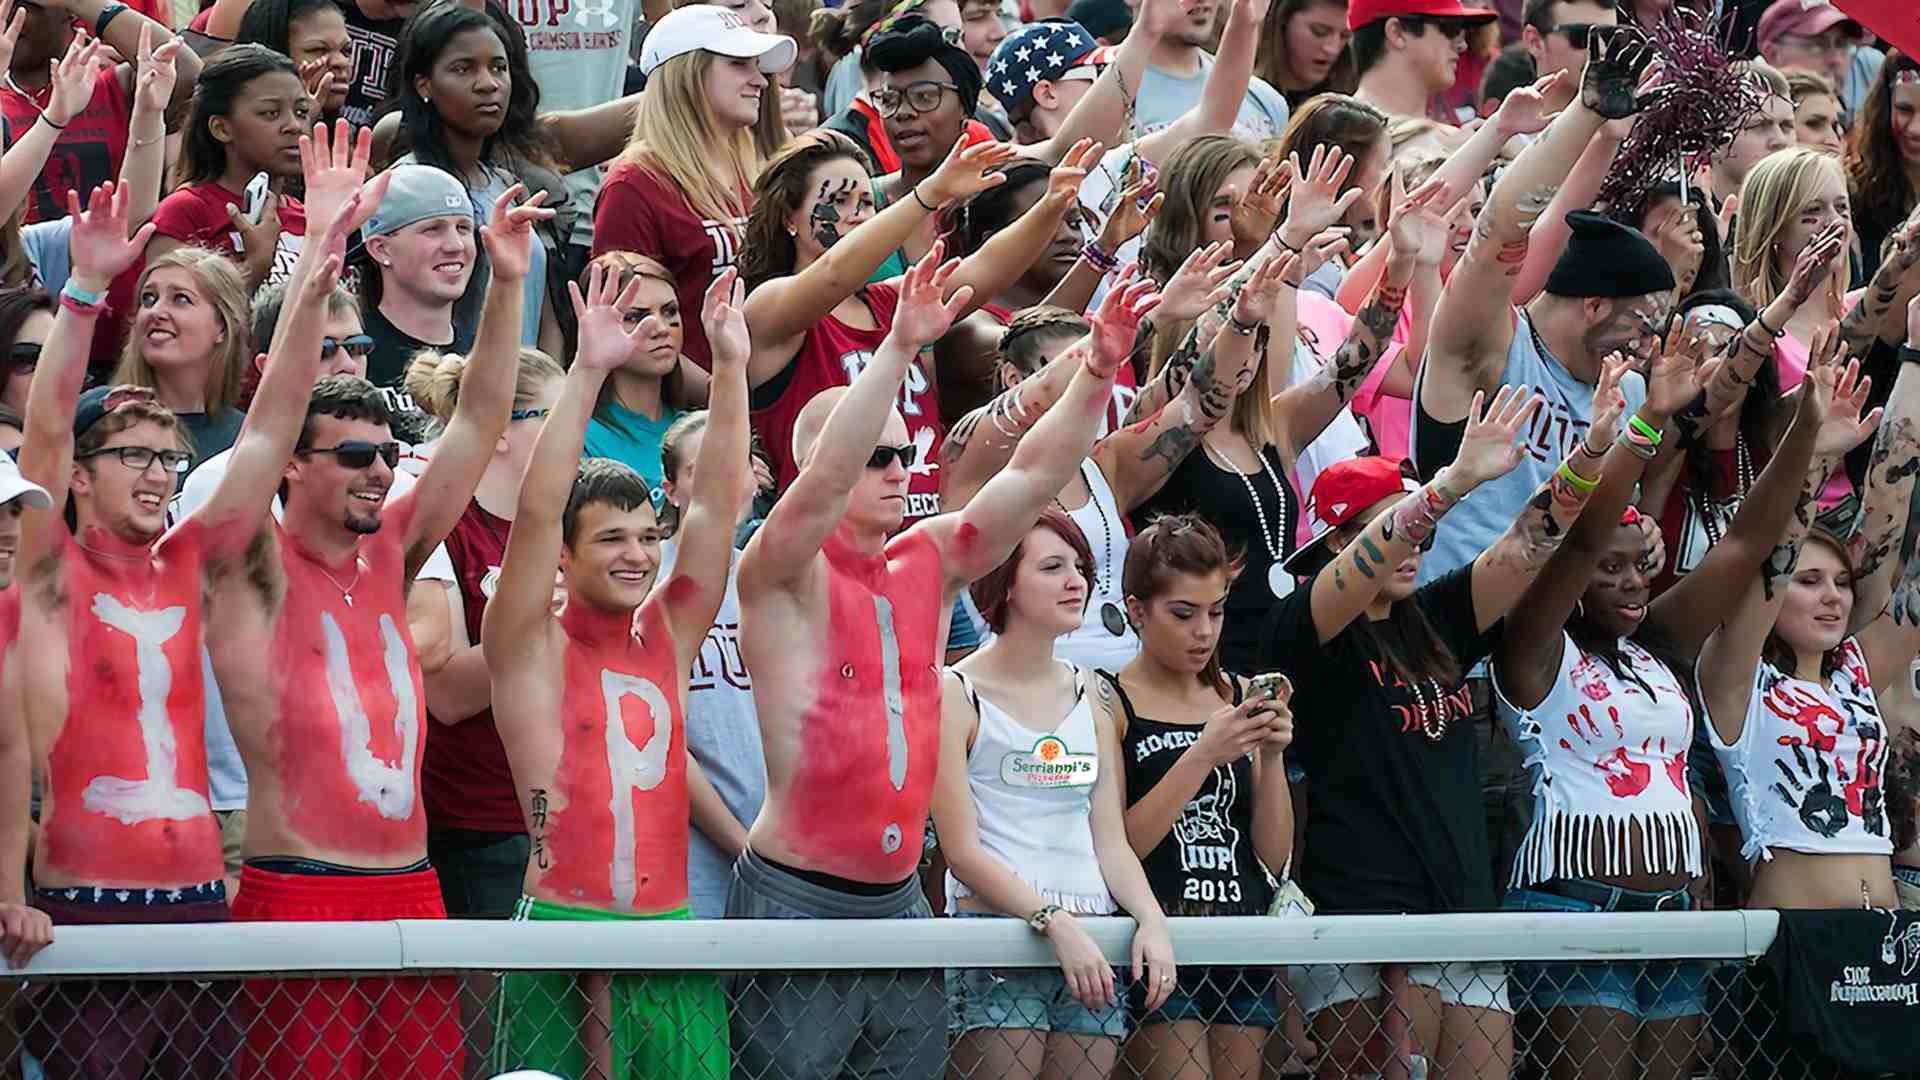 Indiana University of Pennsylvania students cheering for their football team, they all look very happy!